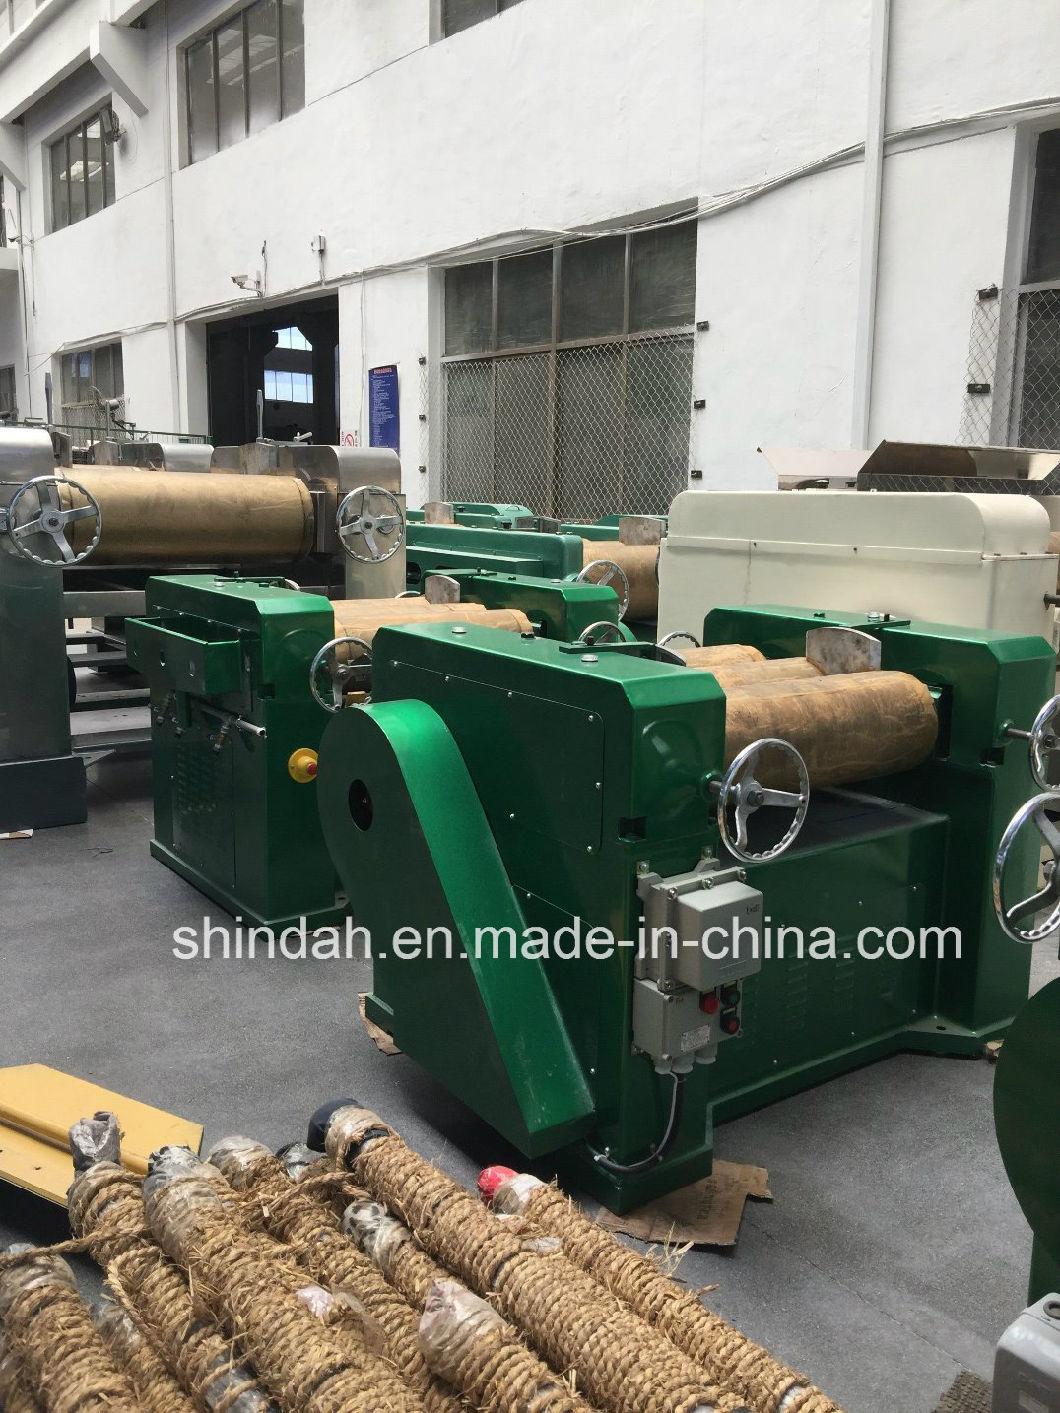 Hot Sale Three Roller Mill Advance Type for Pigment, Paint